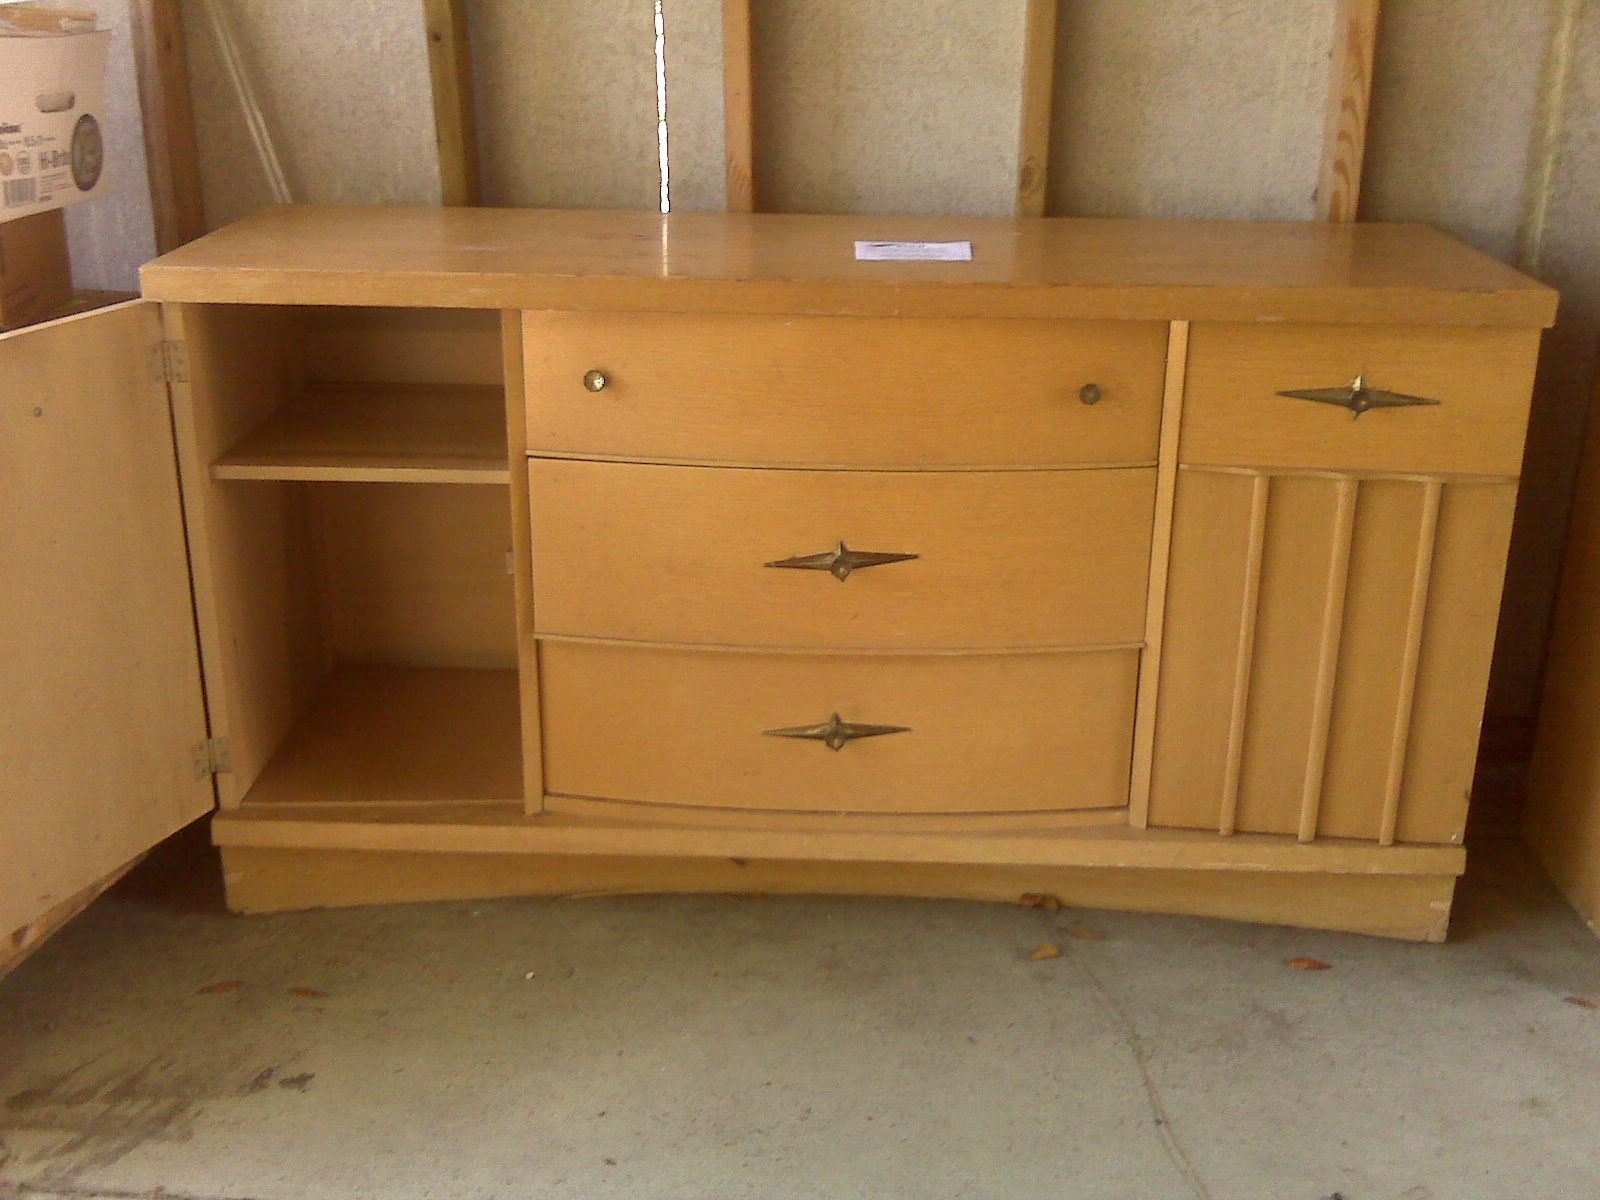 an old style dresser with two shelves, and drawers underneath